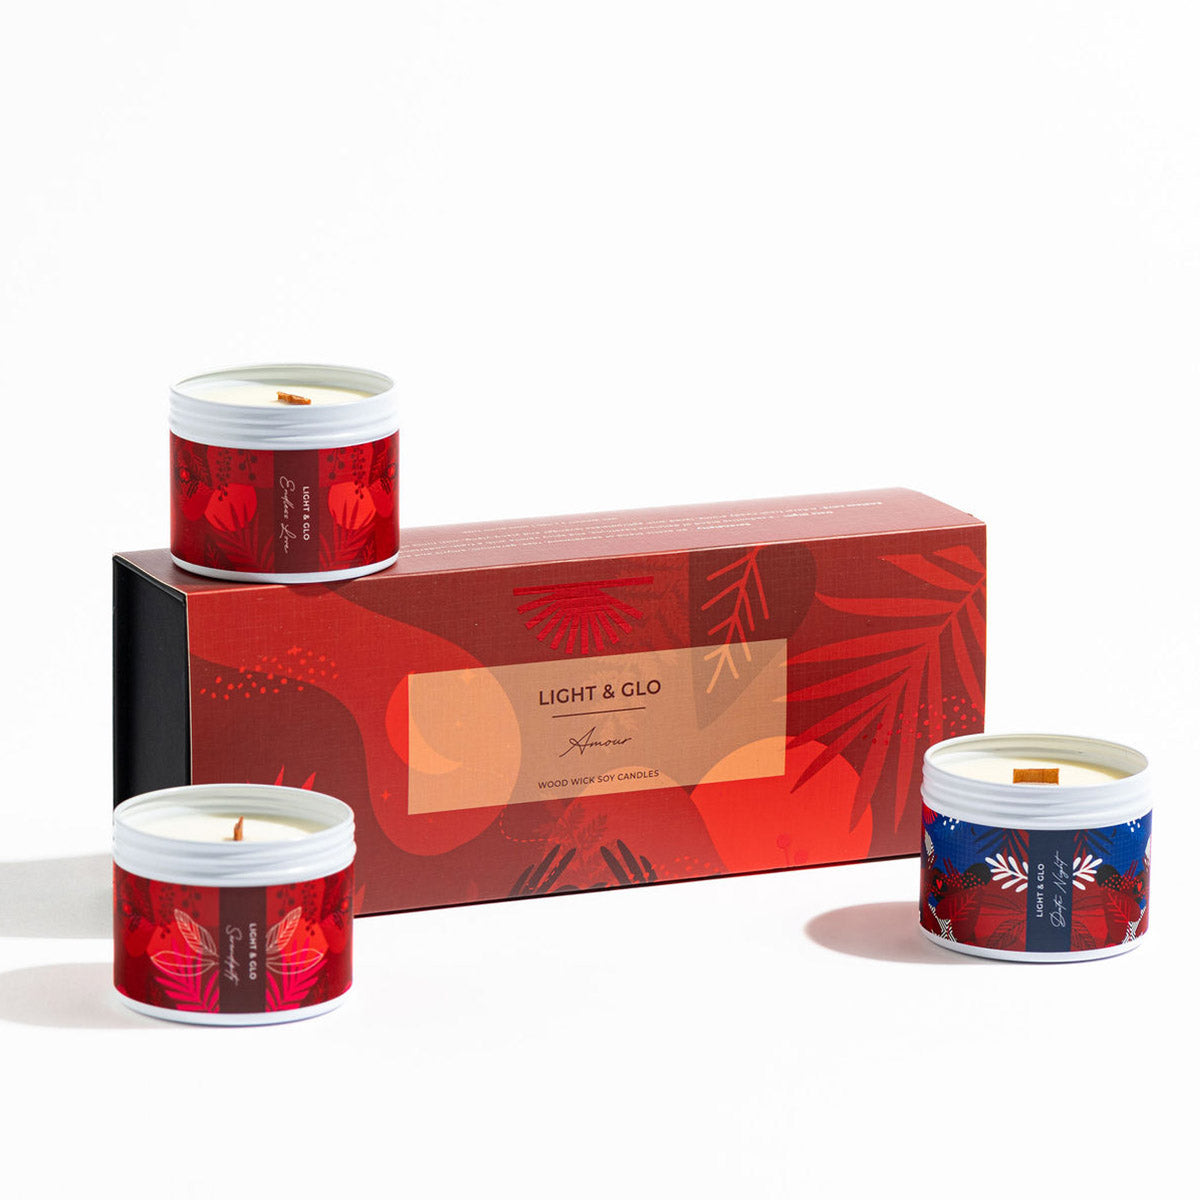 Amour Candle Trio Pack - Date Night, Serendipity, Endless Love | Luxury Candles & Home Fragrances by Light + Glo